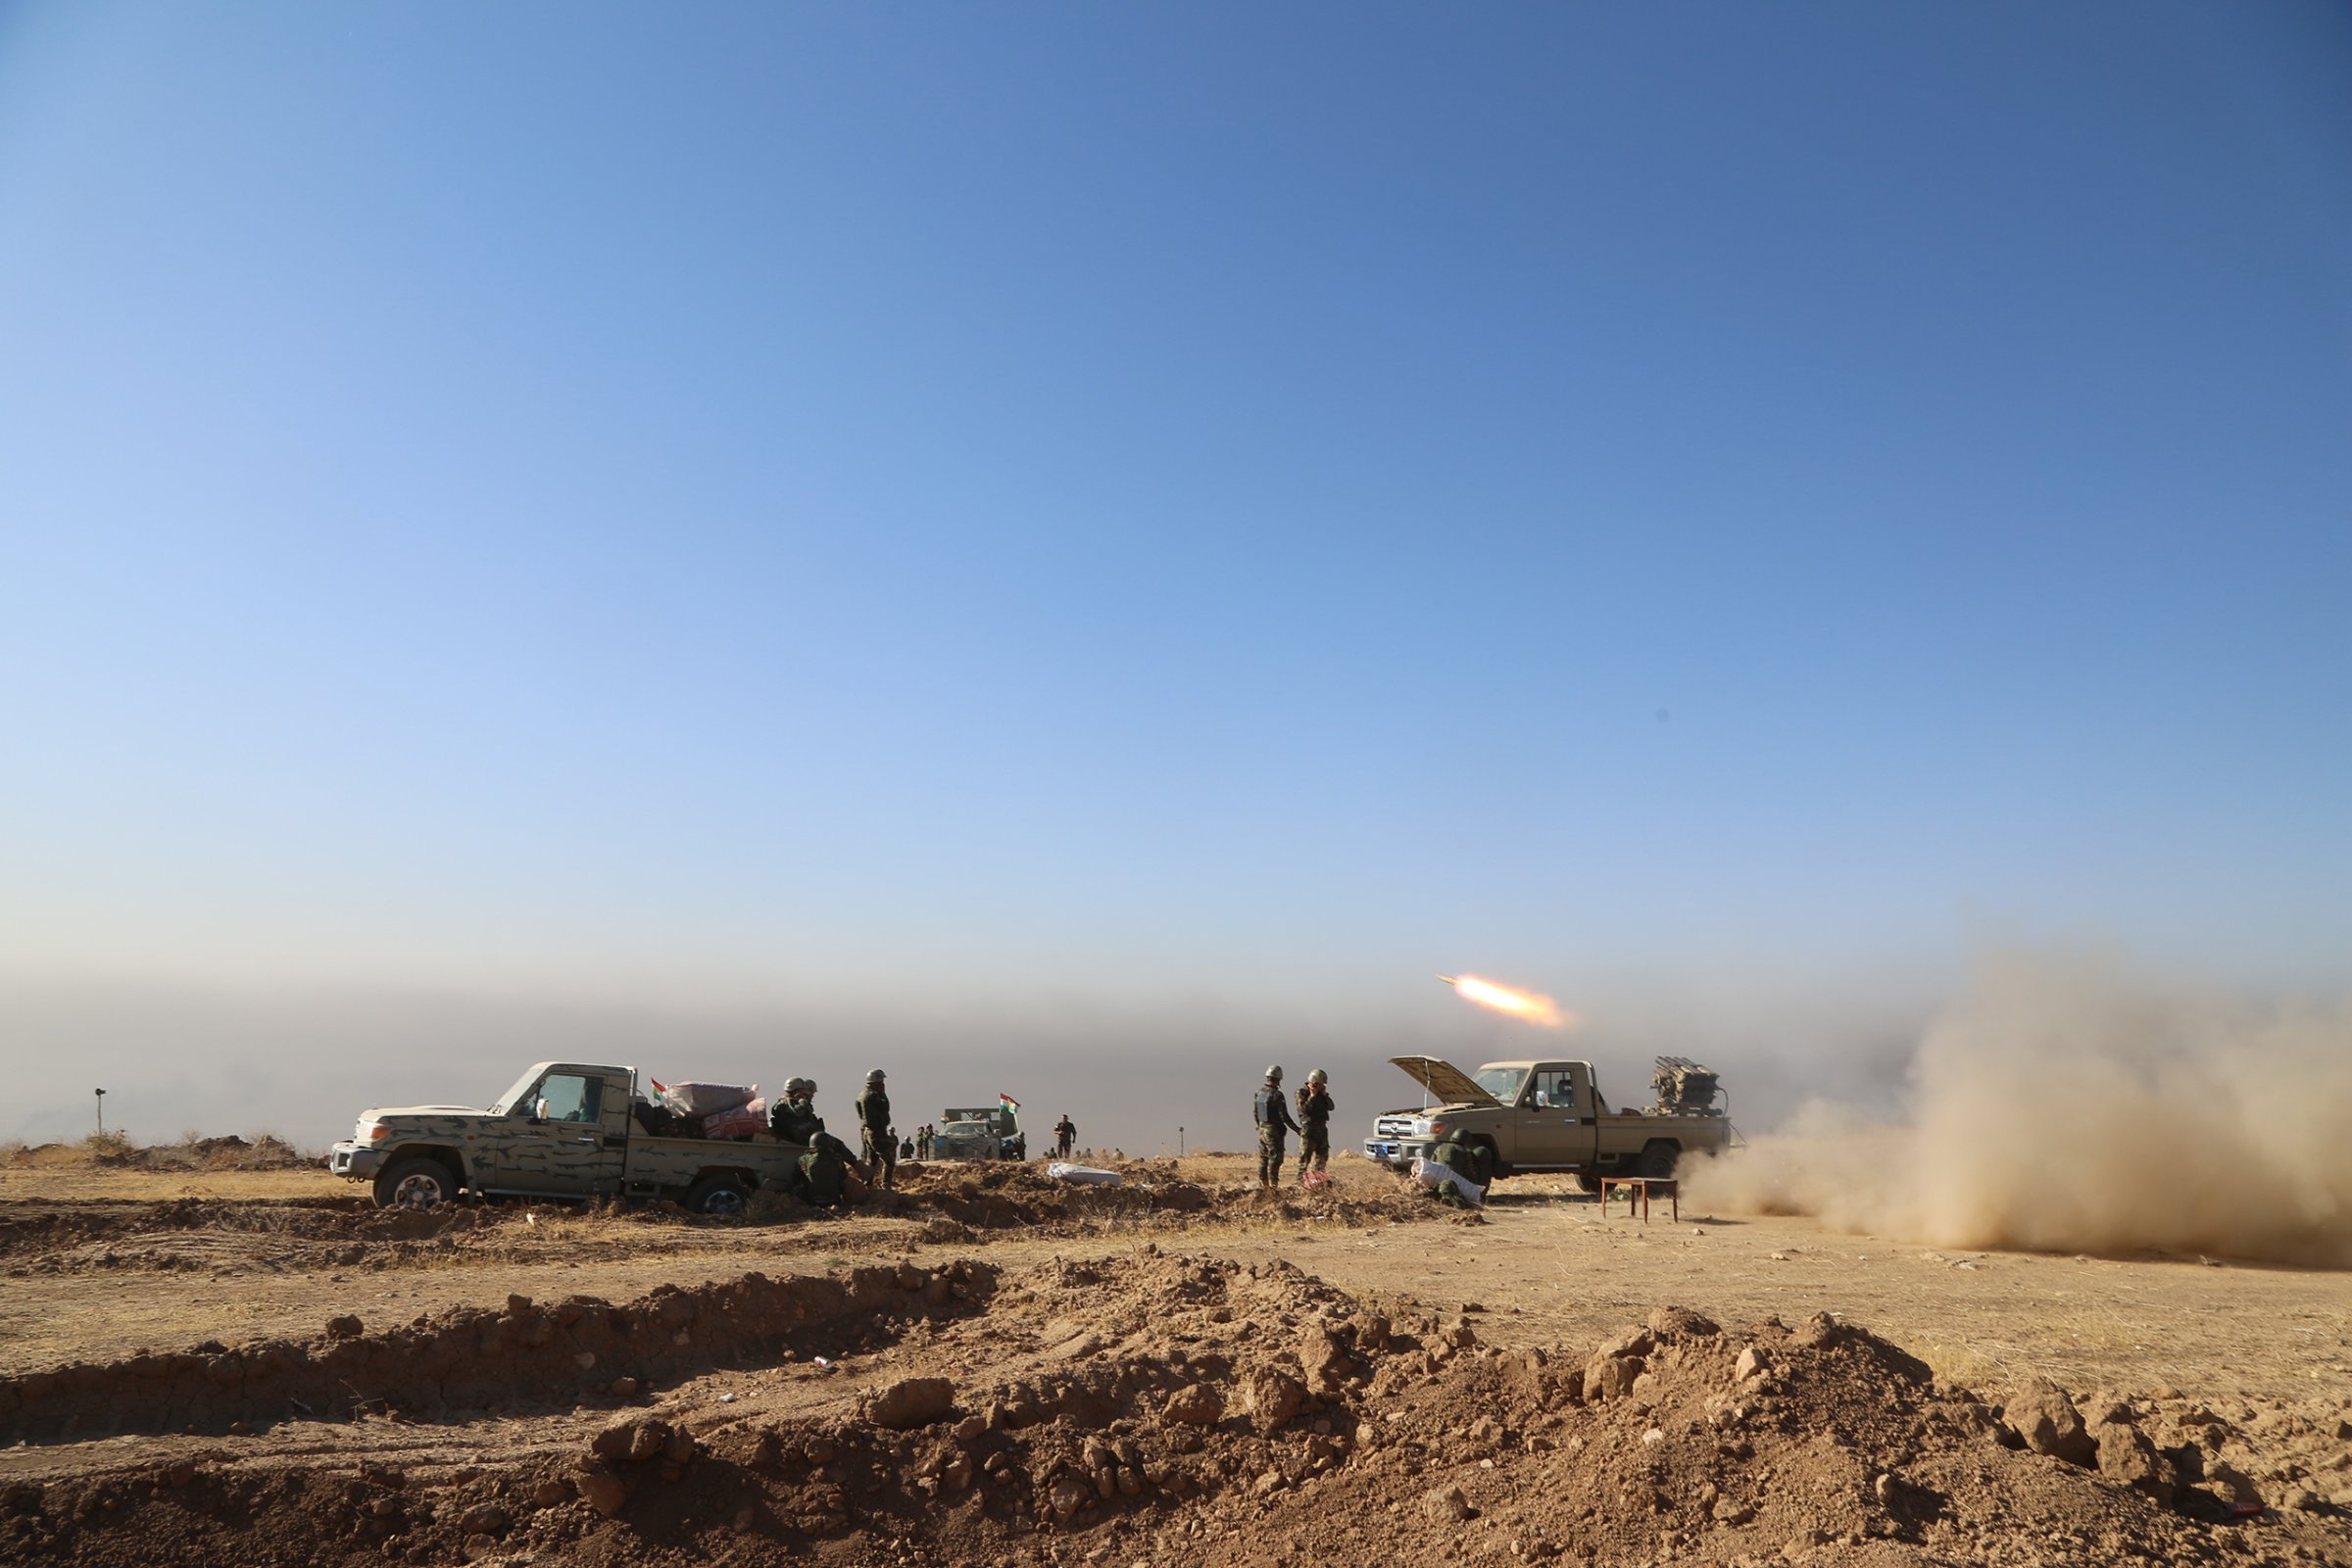 Kurdish Peshmerga forces located at Mount Zardak fire toward an ISIS position during an operation to retake Iraq's Mosul, held by the militant group since 2014, on Oct. 17, 2016.